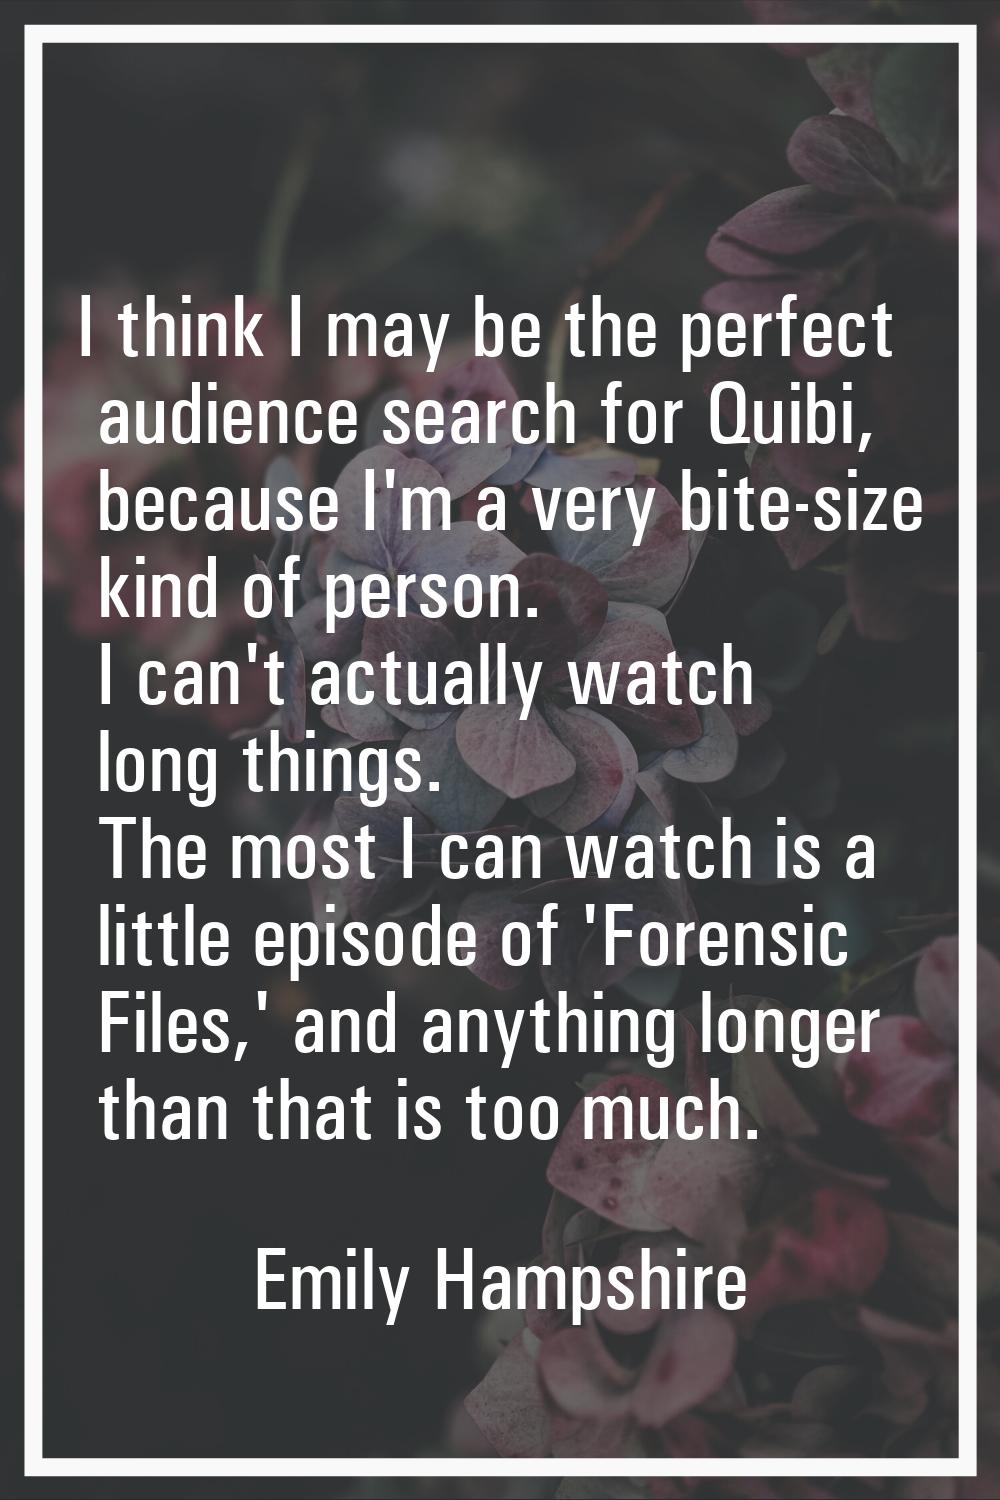 I think I may be the perfect audience search for Quibi, because I'm a very bite-size kind of person